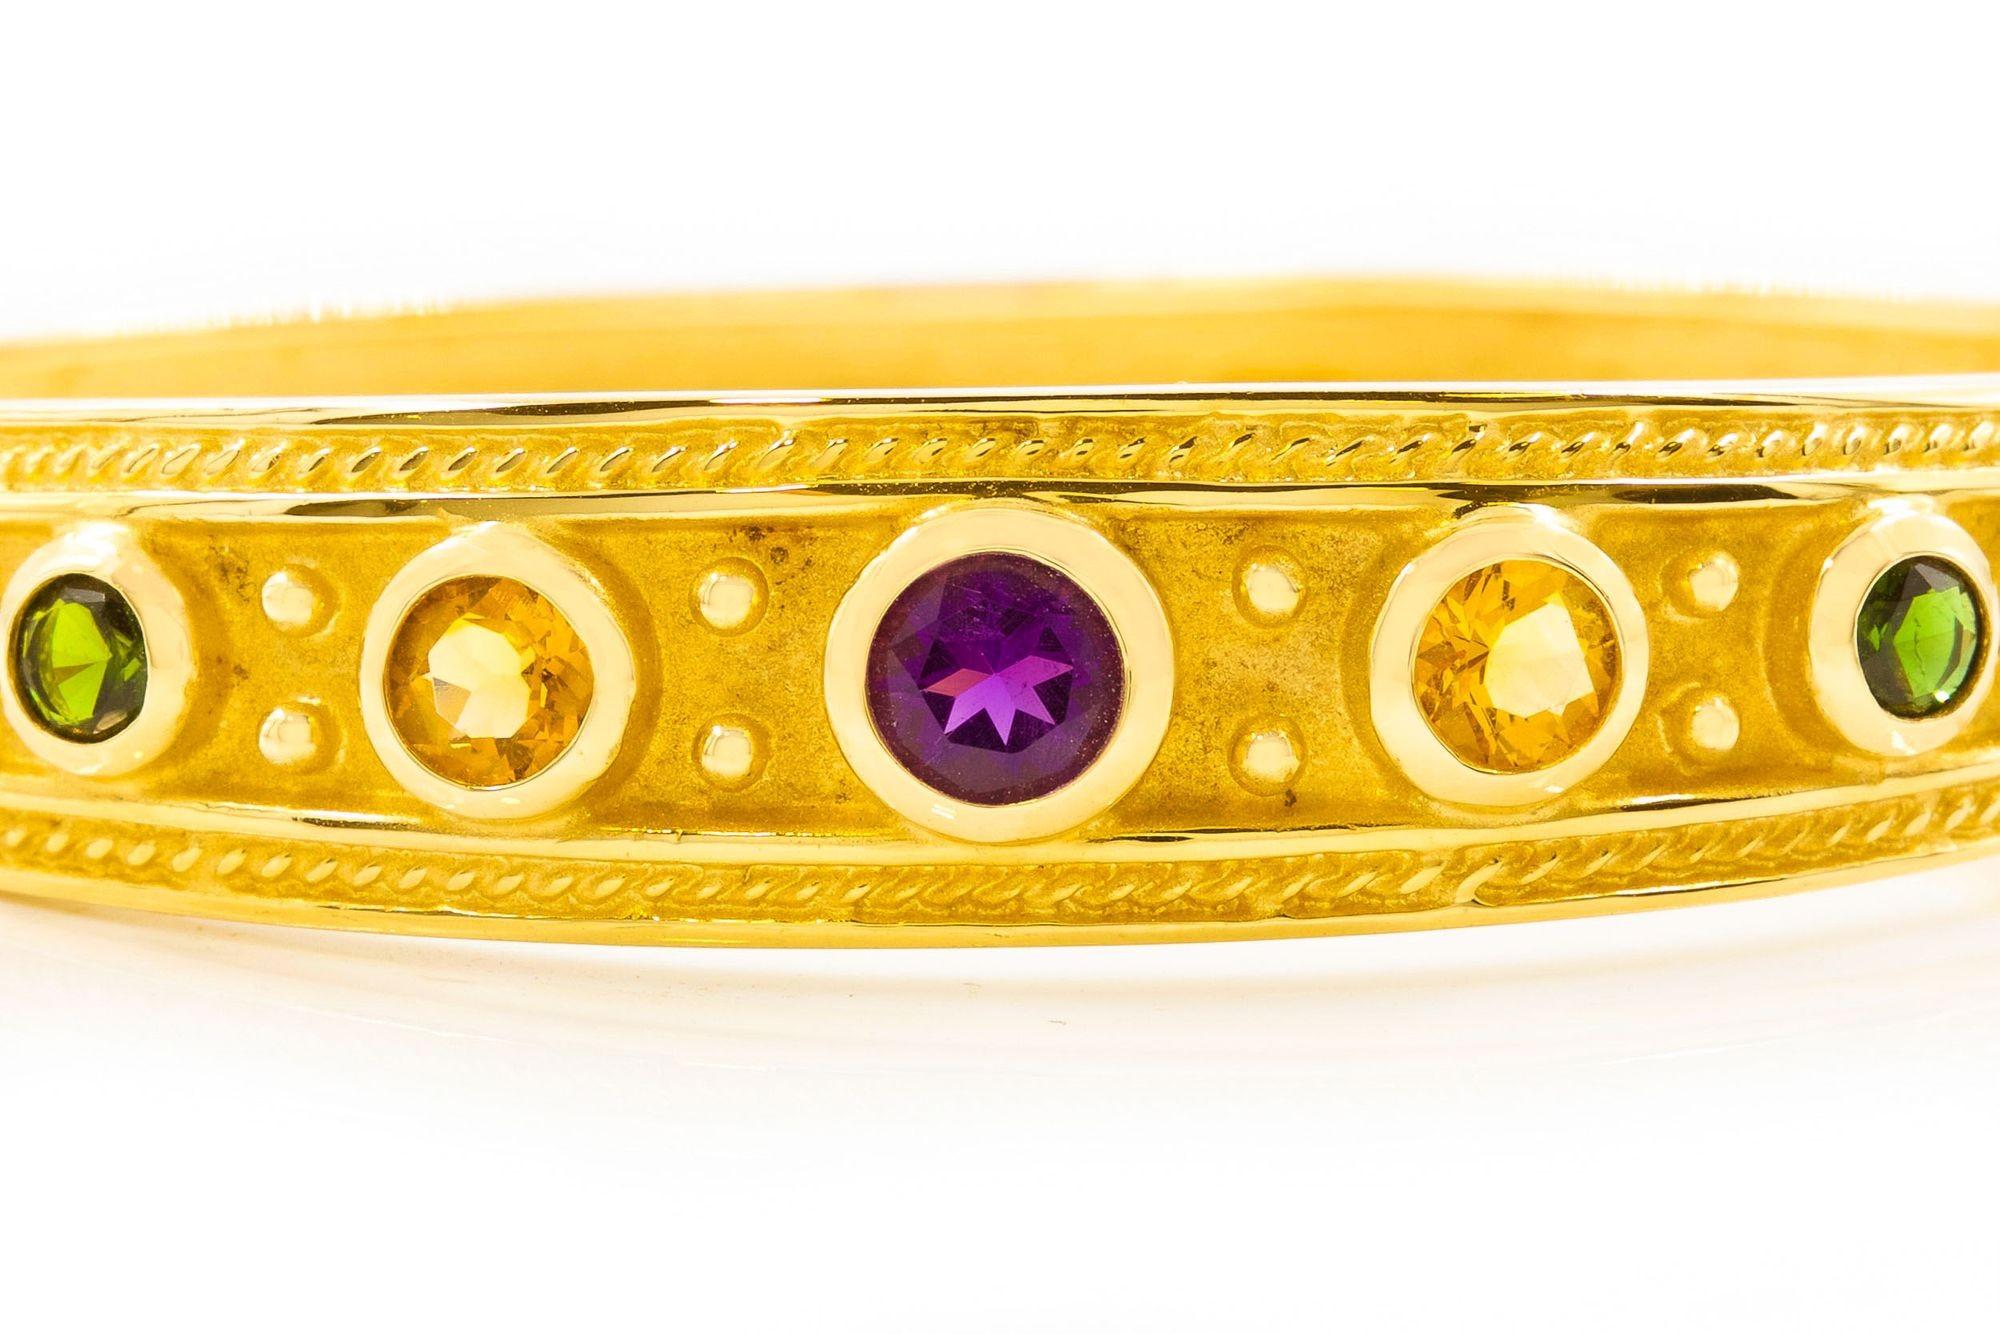 Vintage Solid 14k Gold Bangle Bracelet with Amethyst, Tourmaline and Beryl In Good Condition For Sale In Shippensburg, PA